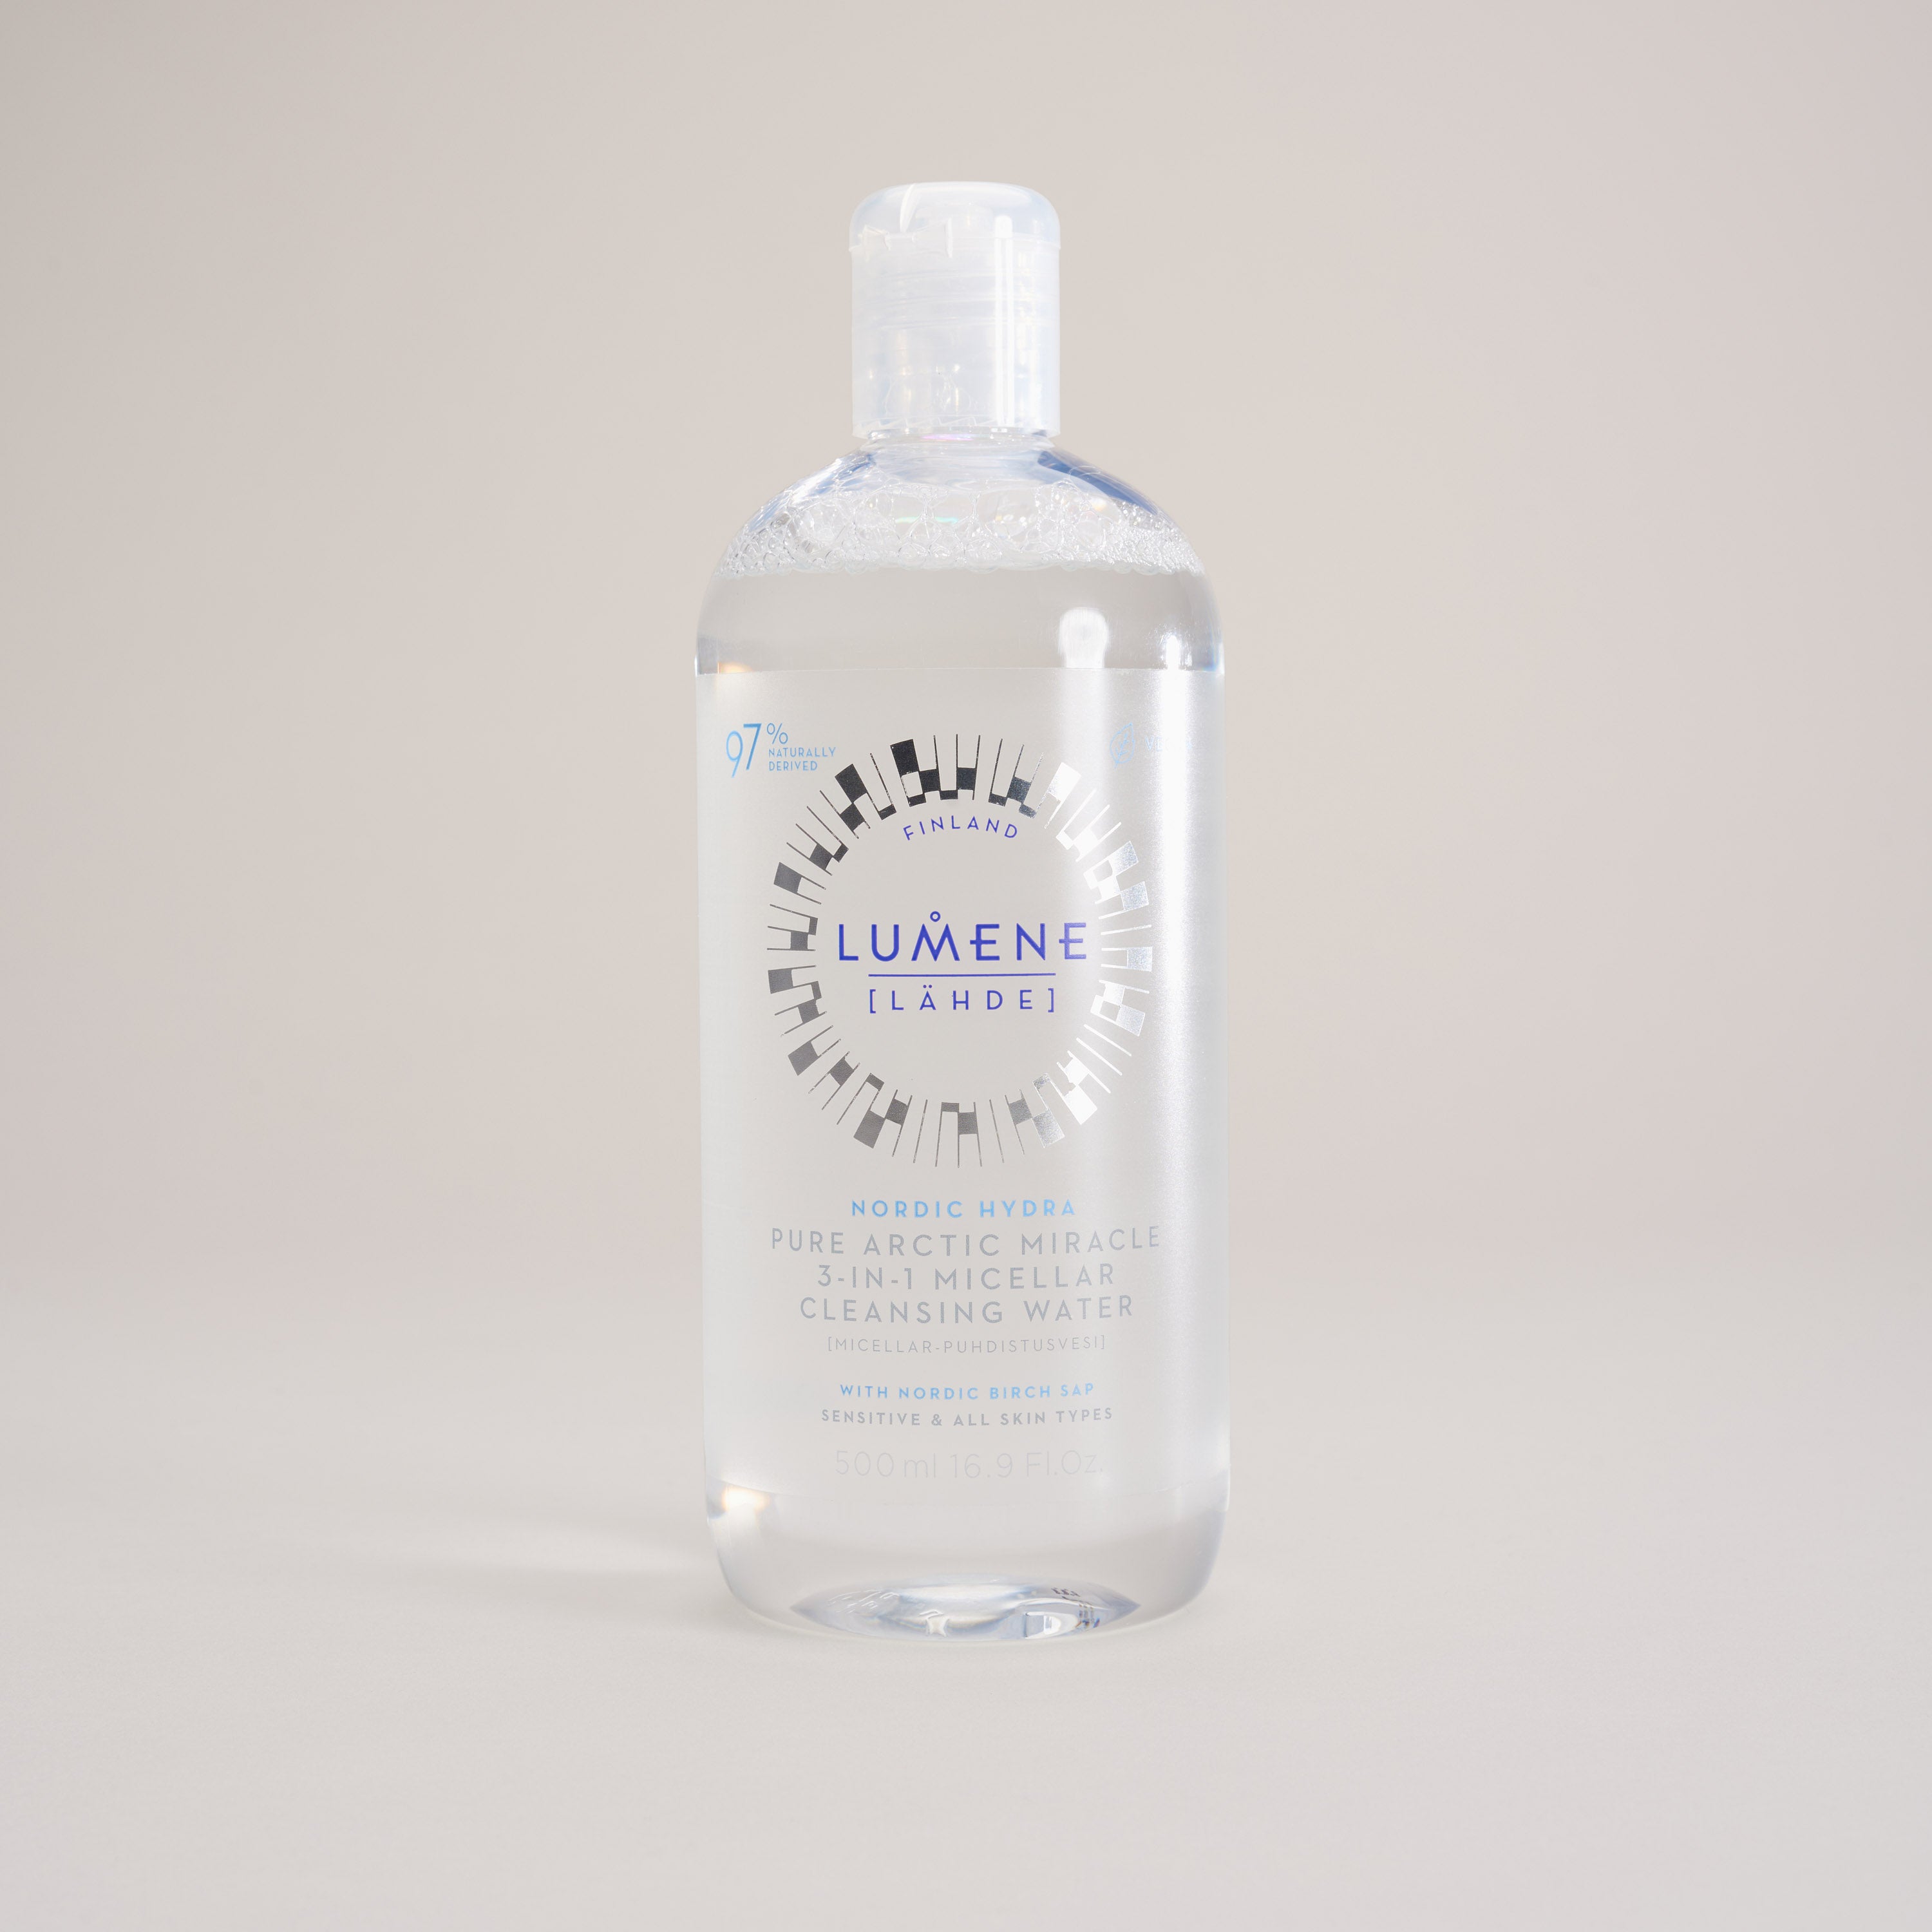 Pure Arctic Miracle 3-IN-1 Micellar Cleansing Water